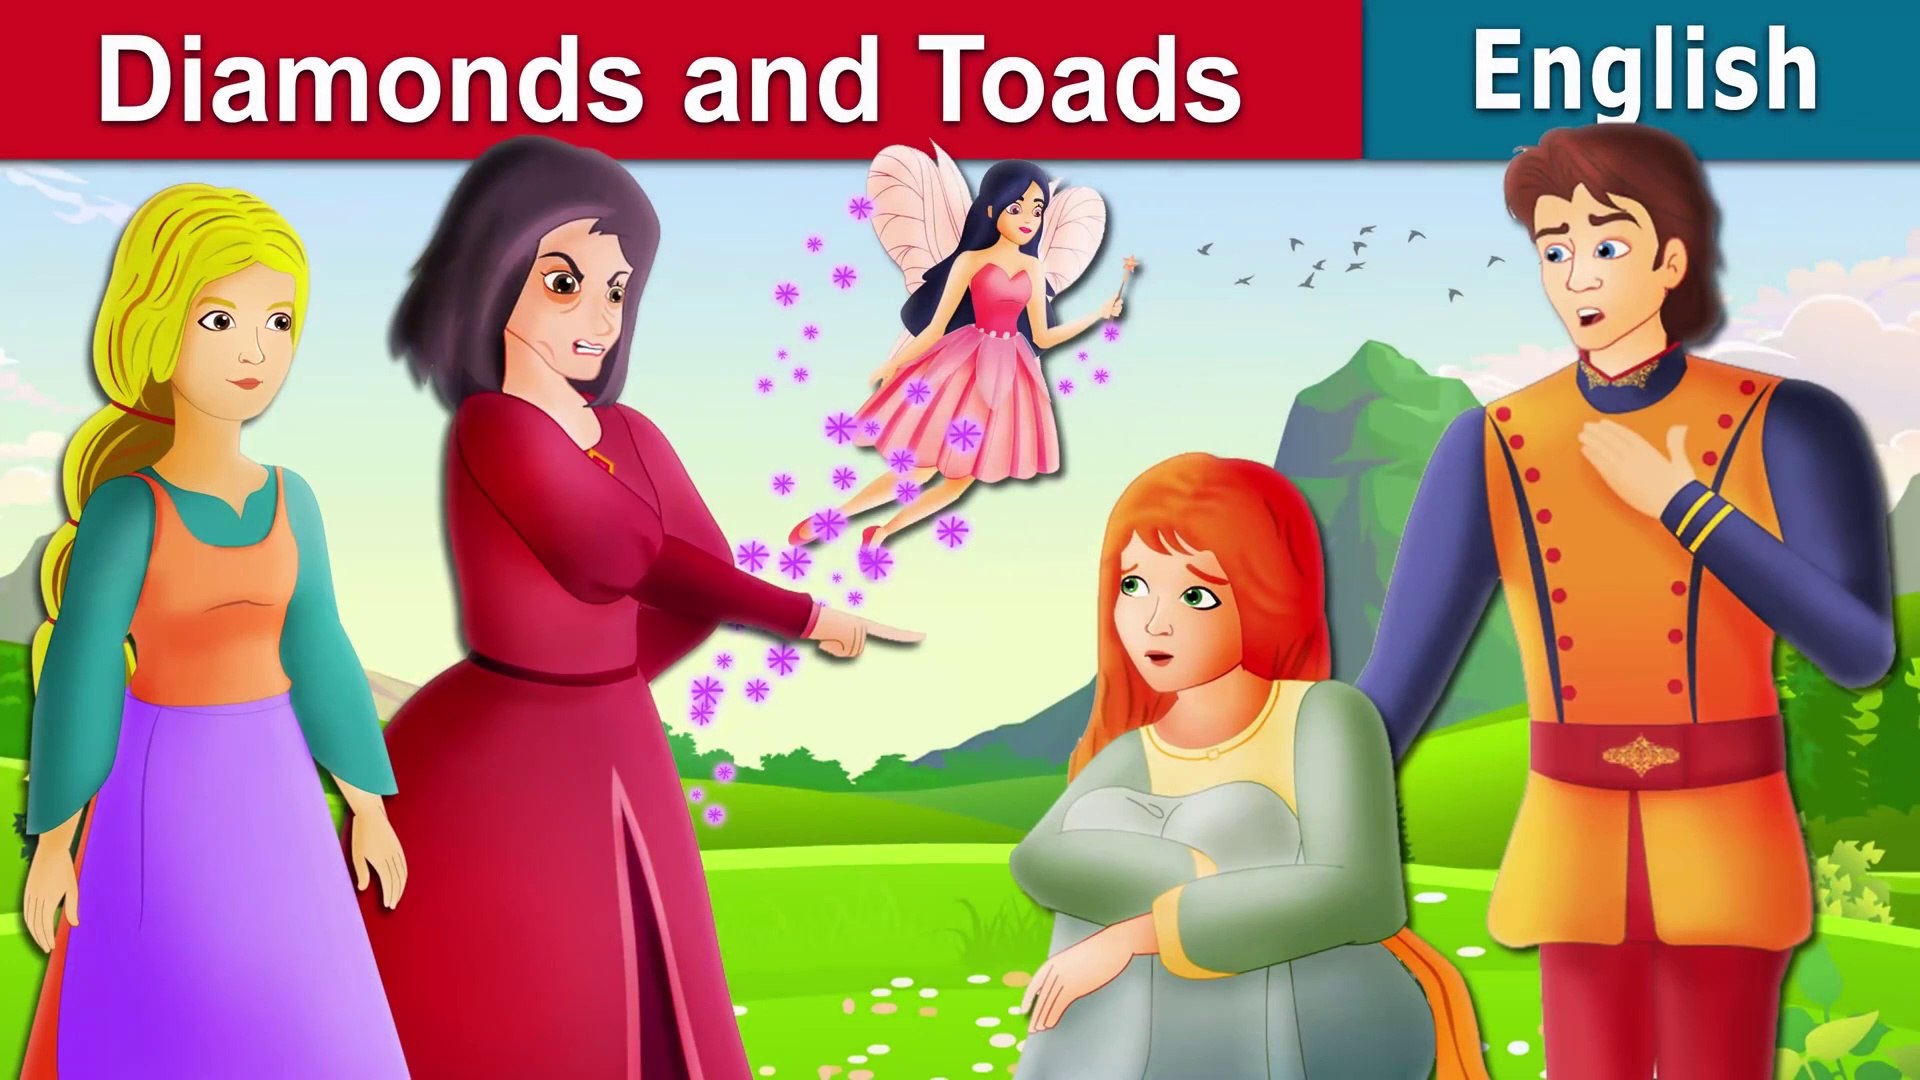 Diamonds and Toads - English Fairy Tales